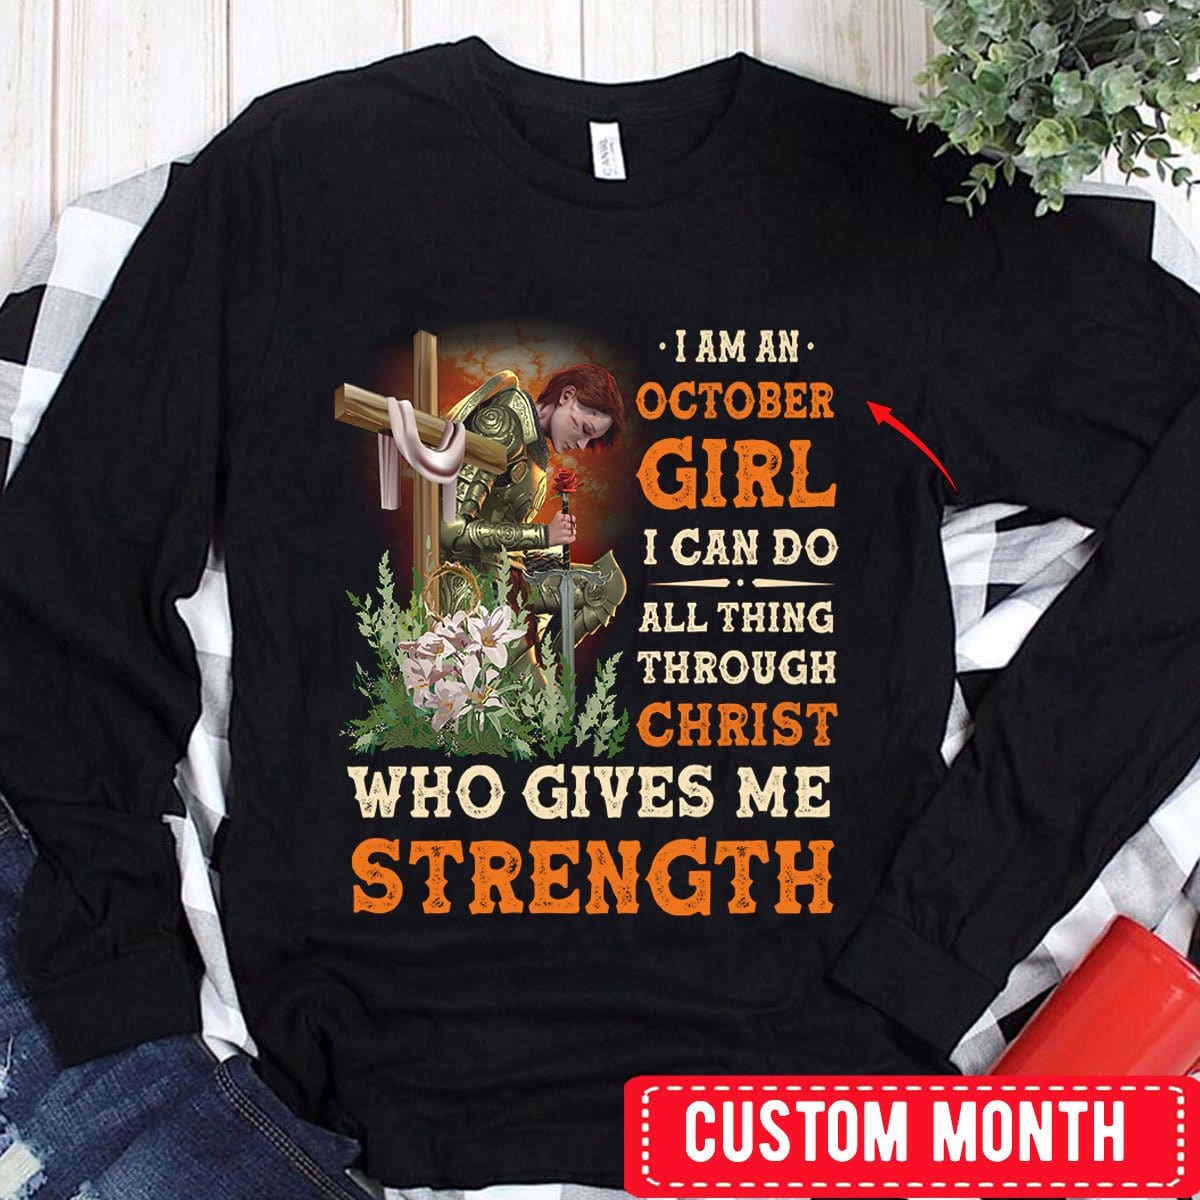 I'm An October Girl, Personalized Birthday Shirts